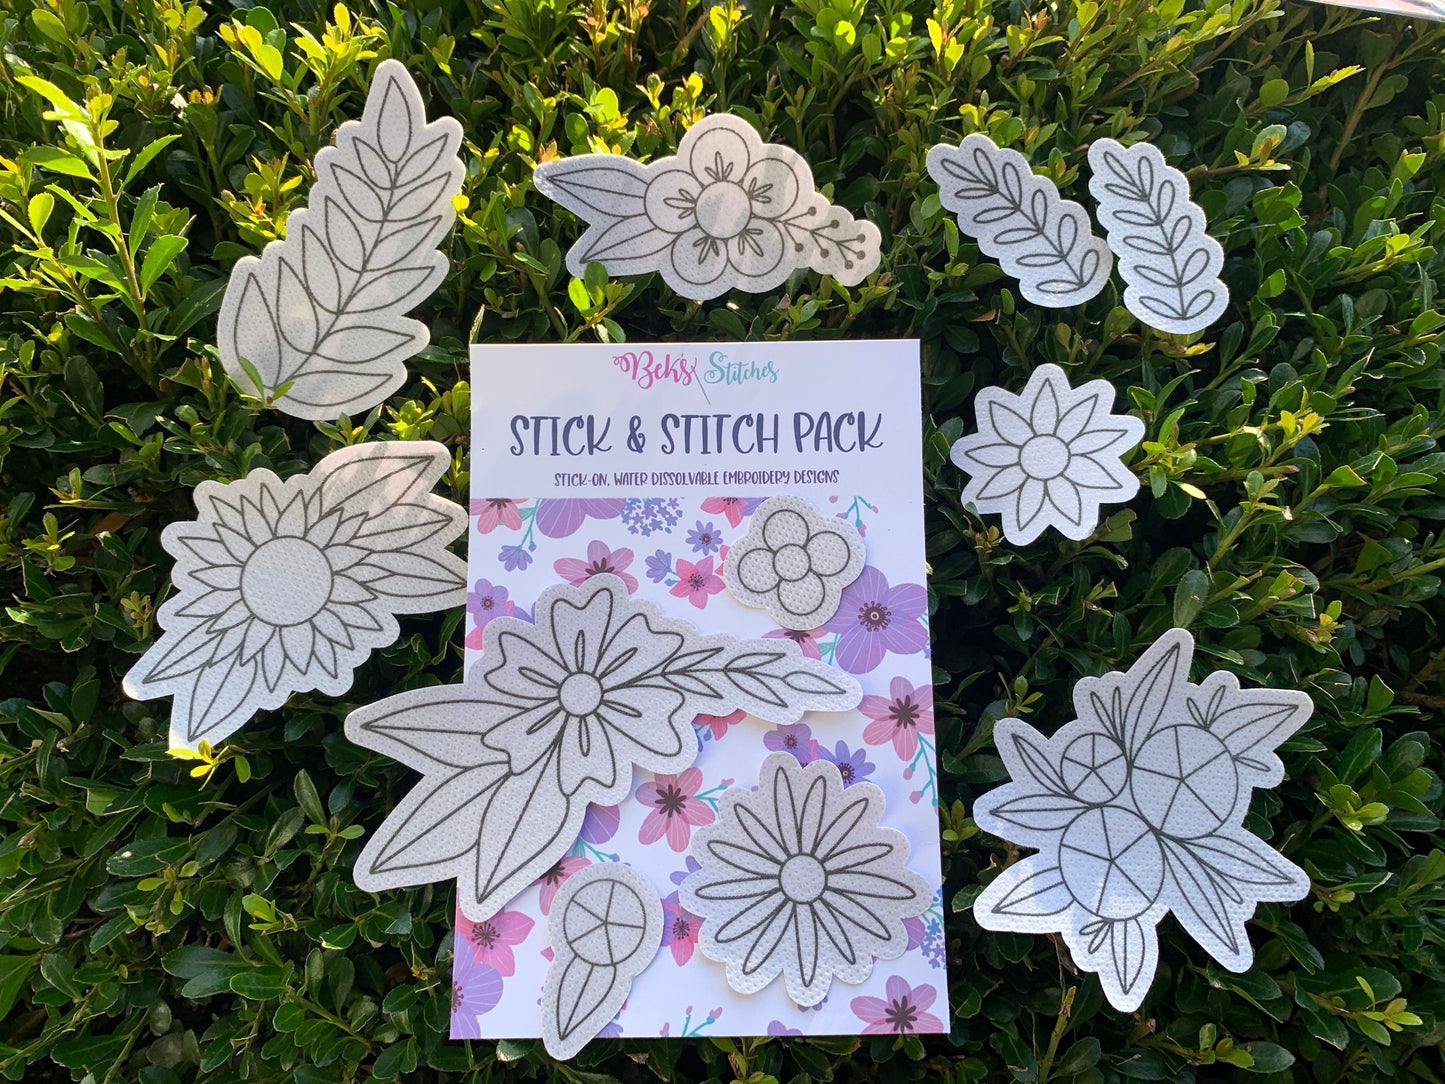 Stick and Stitch Pack - Original Florals, Water-Soluble Dissolving Stick-On Embroidery Designs